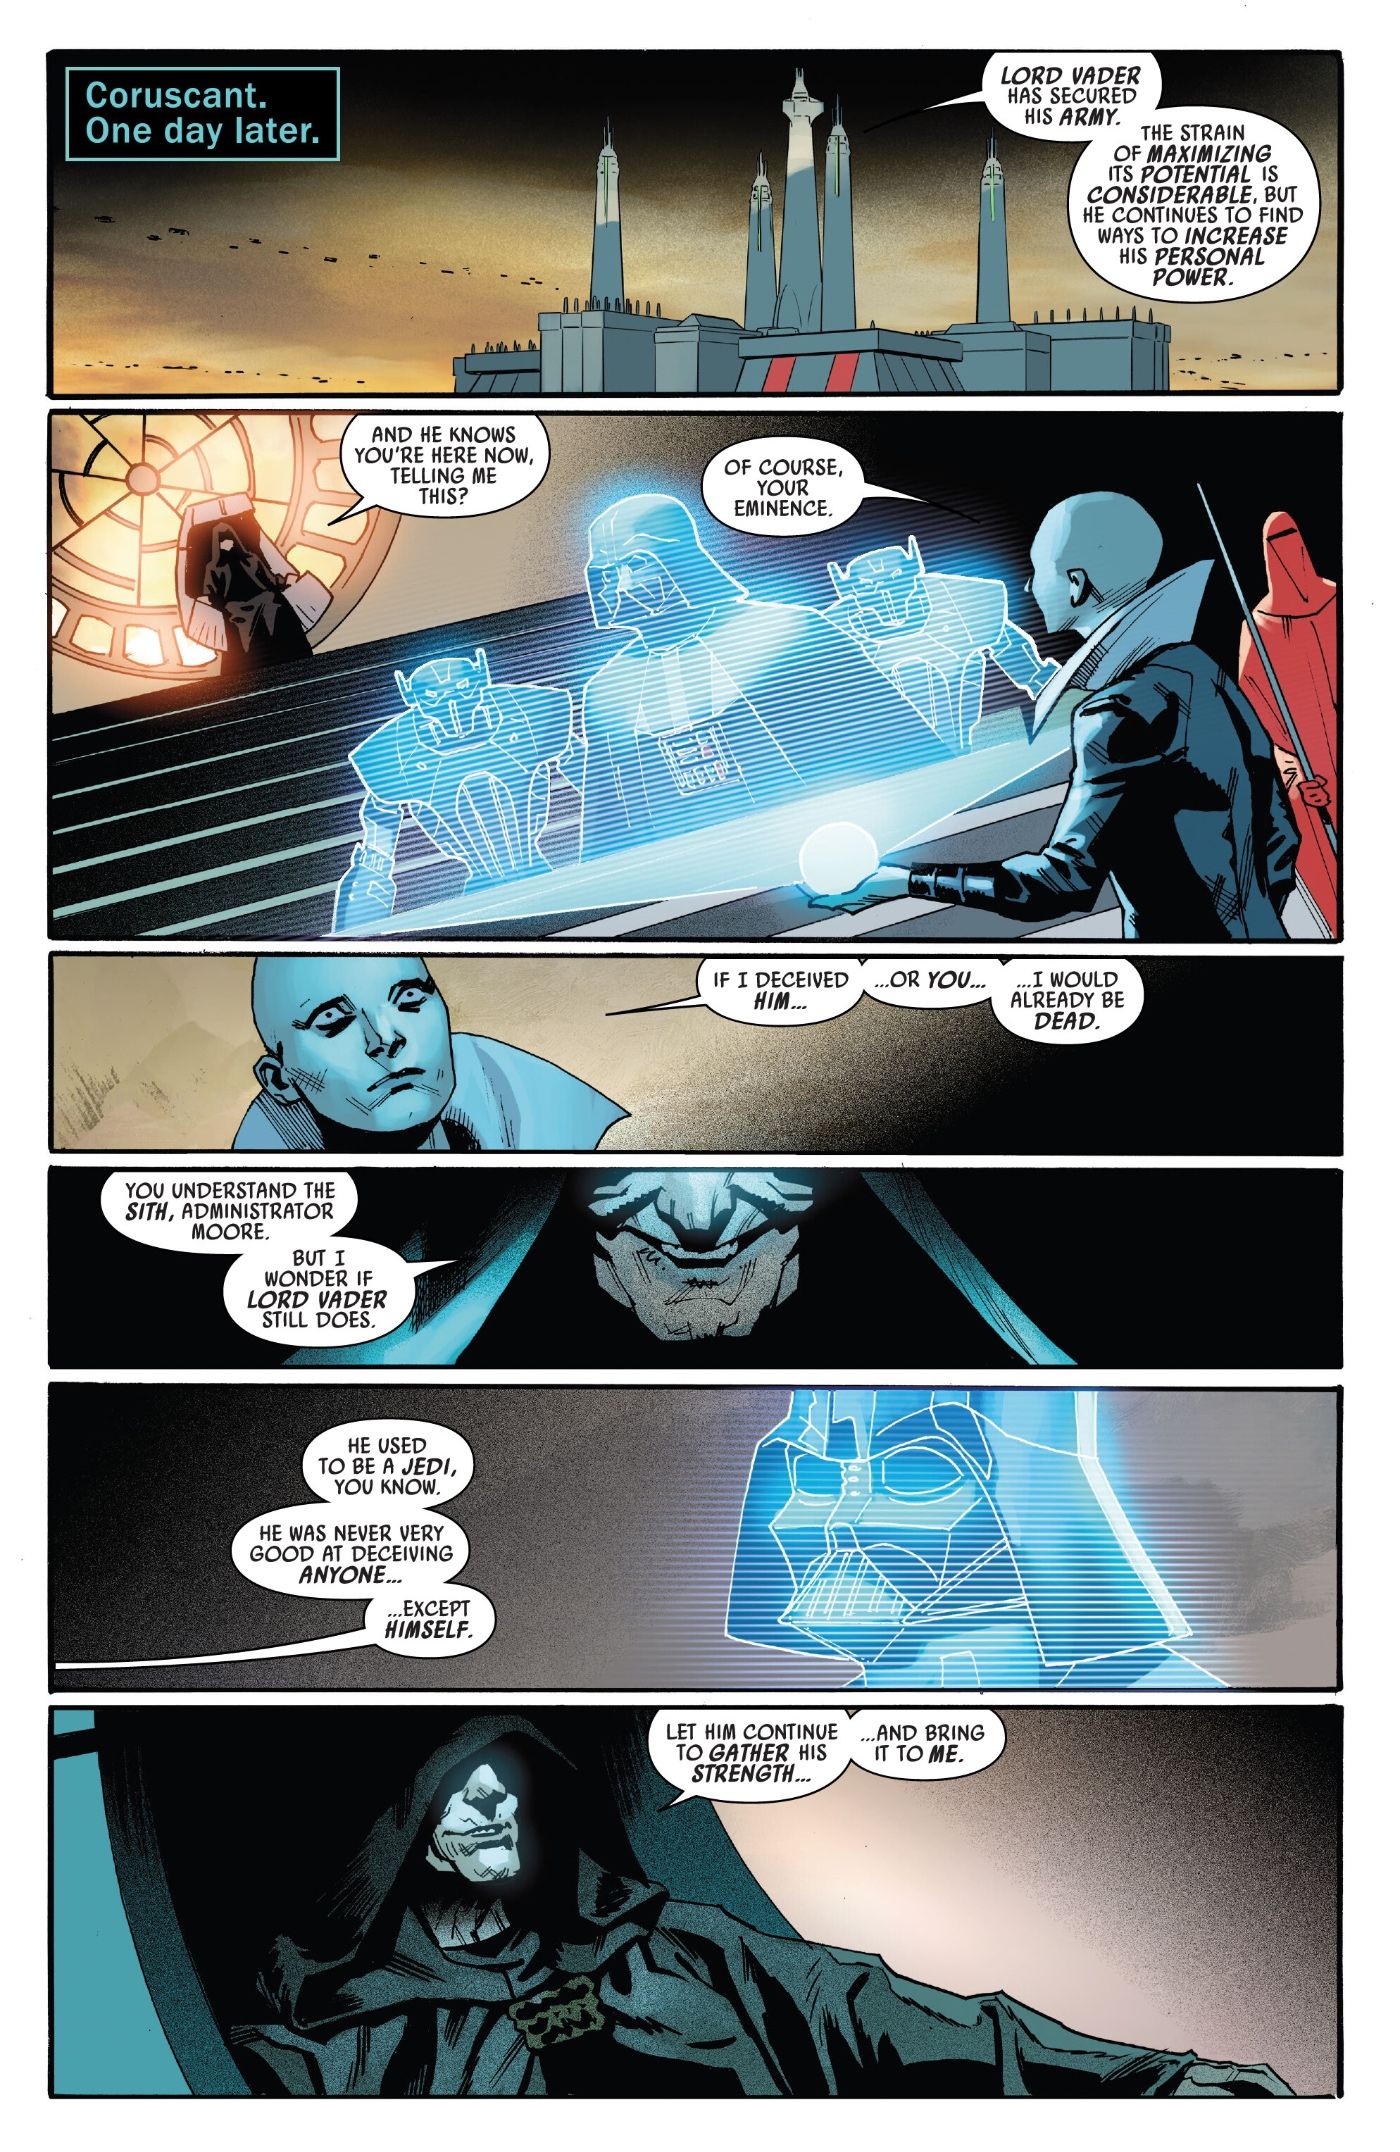 Darth Vader’s Latest Attack On Palpatine Is His Biggest Ever (& The Emperor Knows He’s Coming)